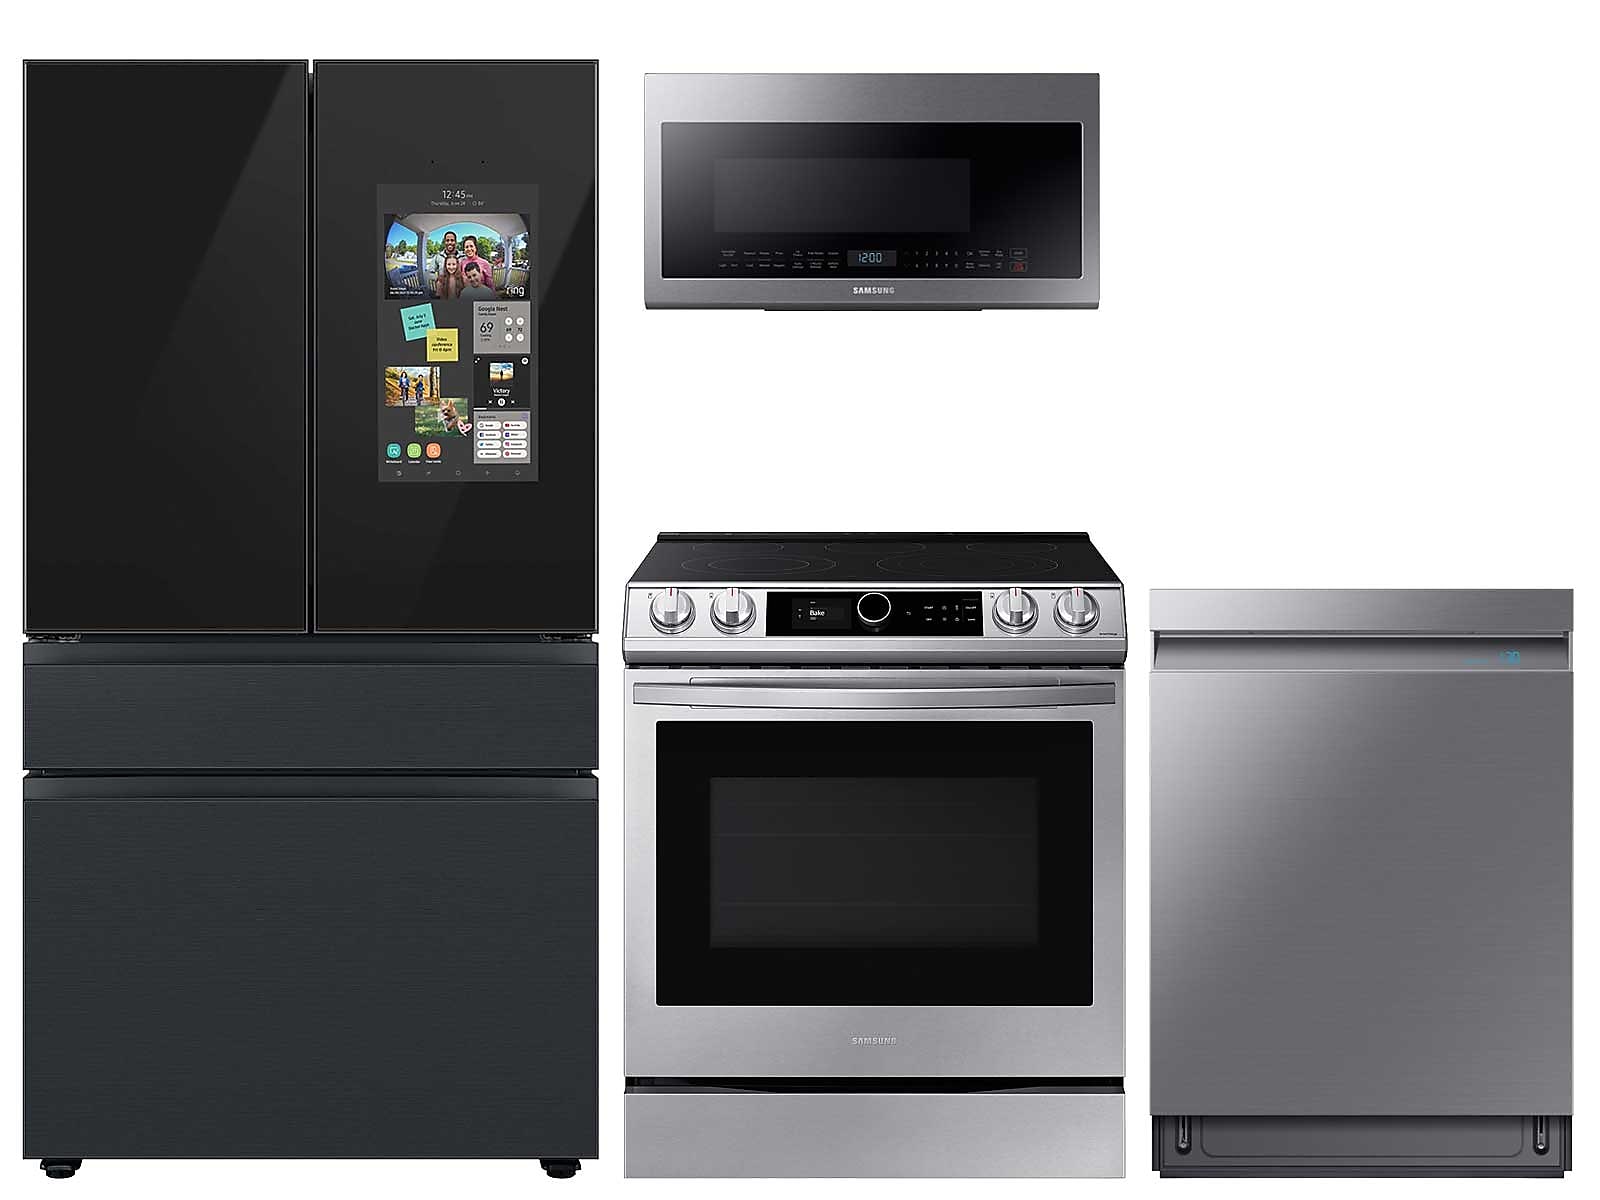 Samsung BESPOKE Family Hub 4-Door French Refrigerator in Charcoal Glass with Smart Slide-in Electric Range, Smart Linear Wash Dishwasher and Over-the-Range Microwave in Stainless Steel